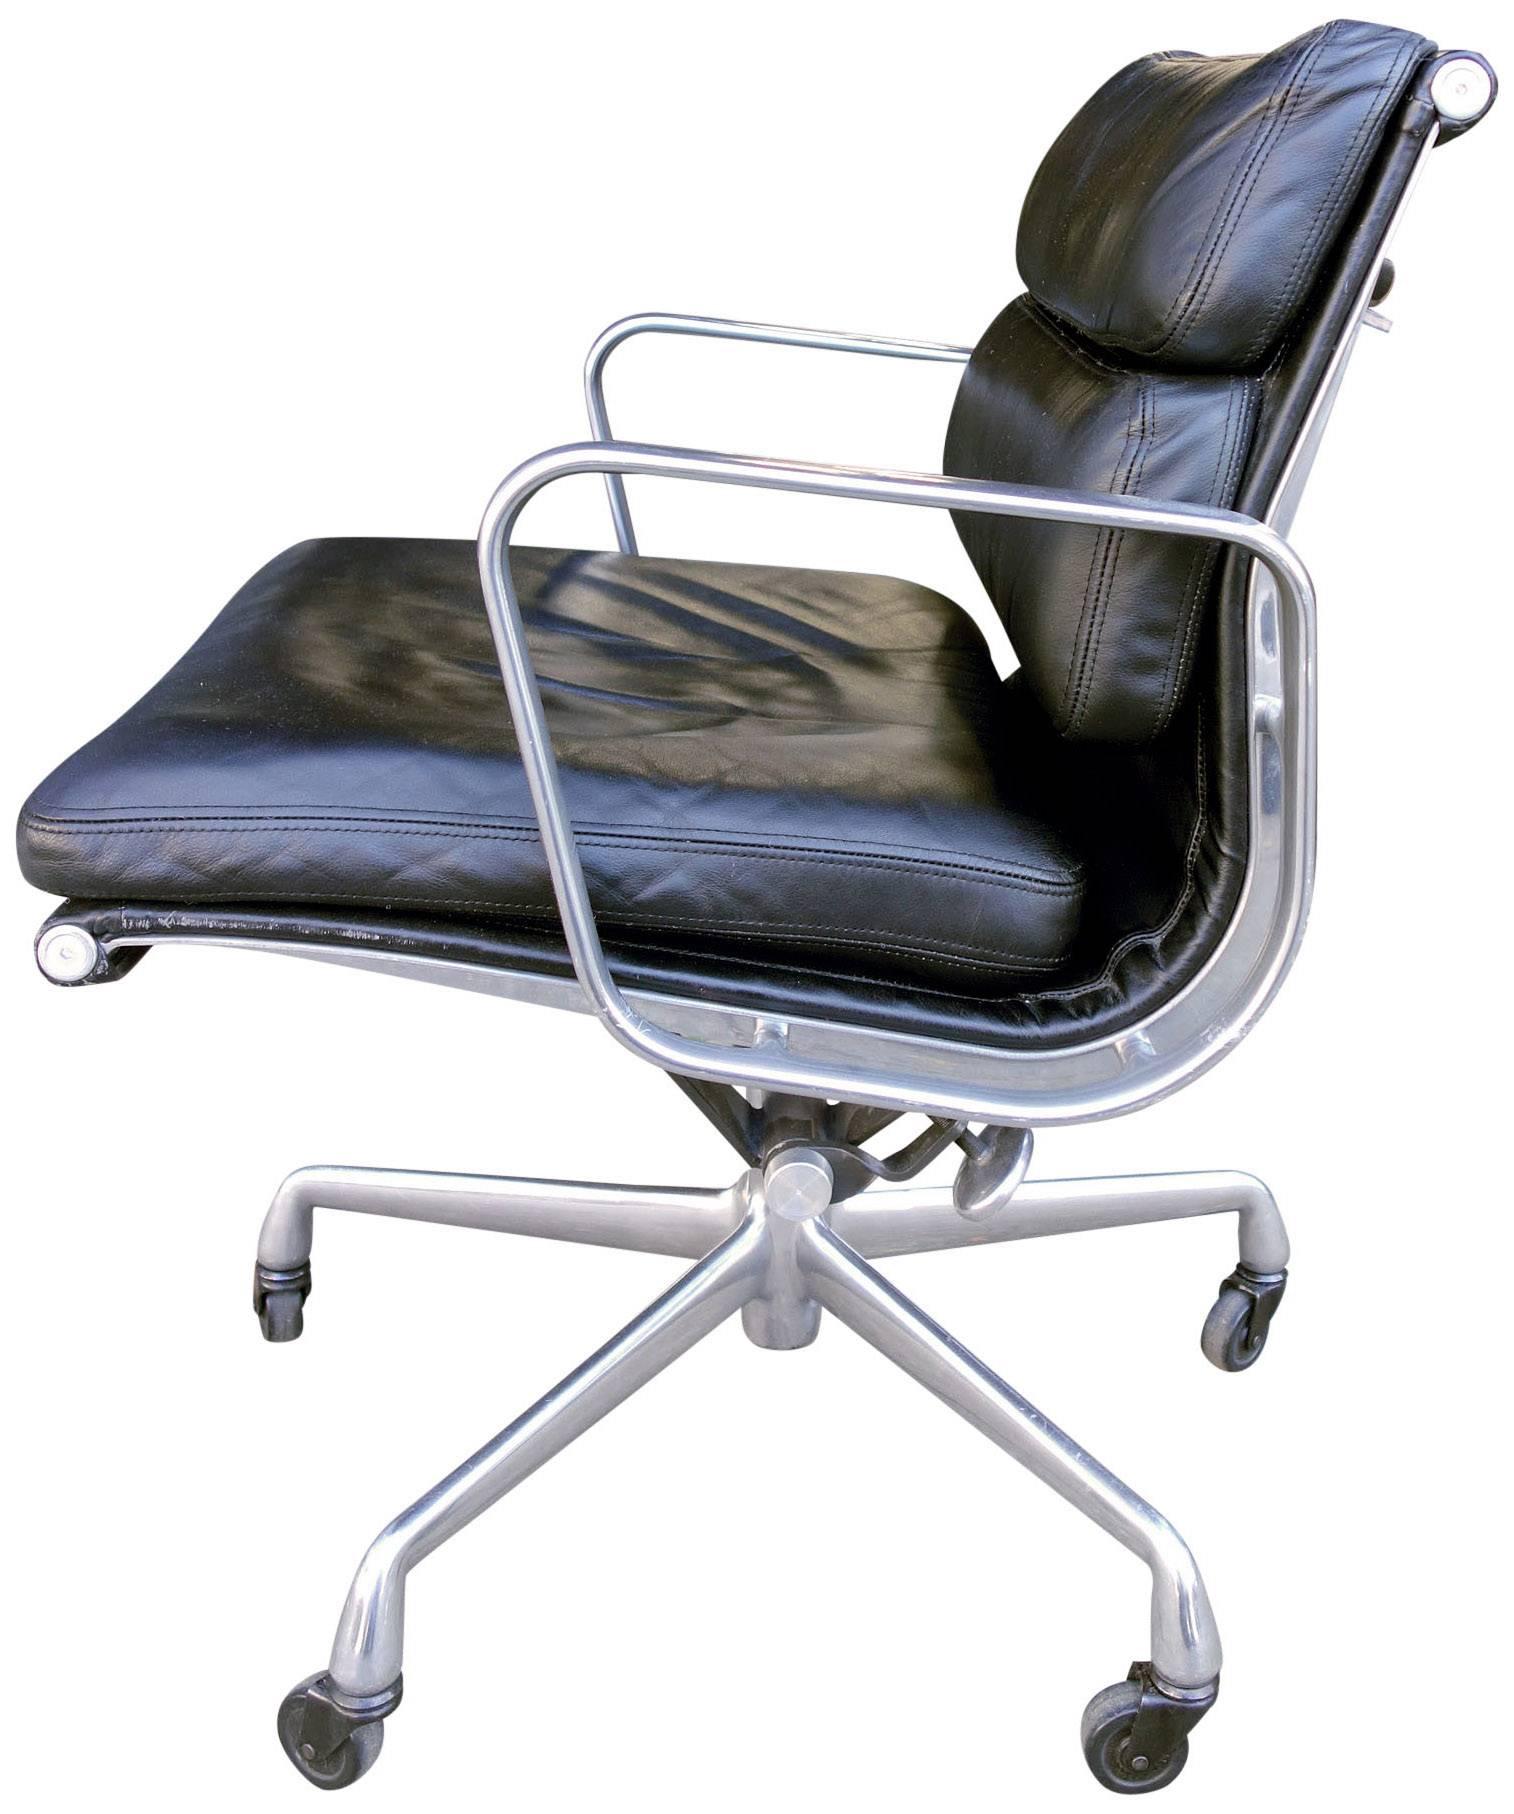 American Mid-Century Soft Pad Chairs by Eames for Herman Miller (Many Available)